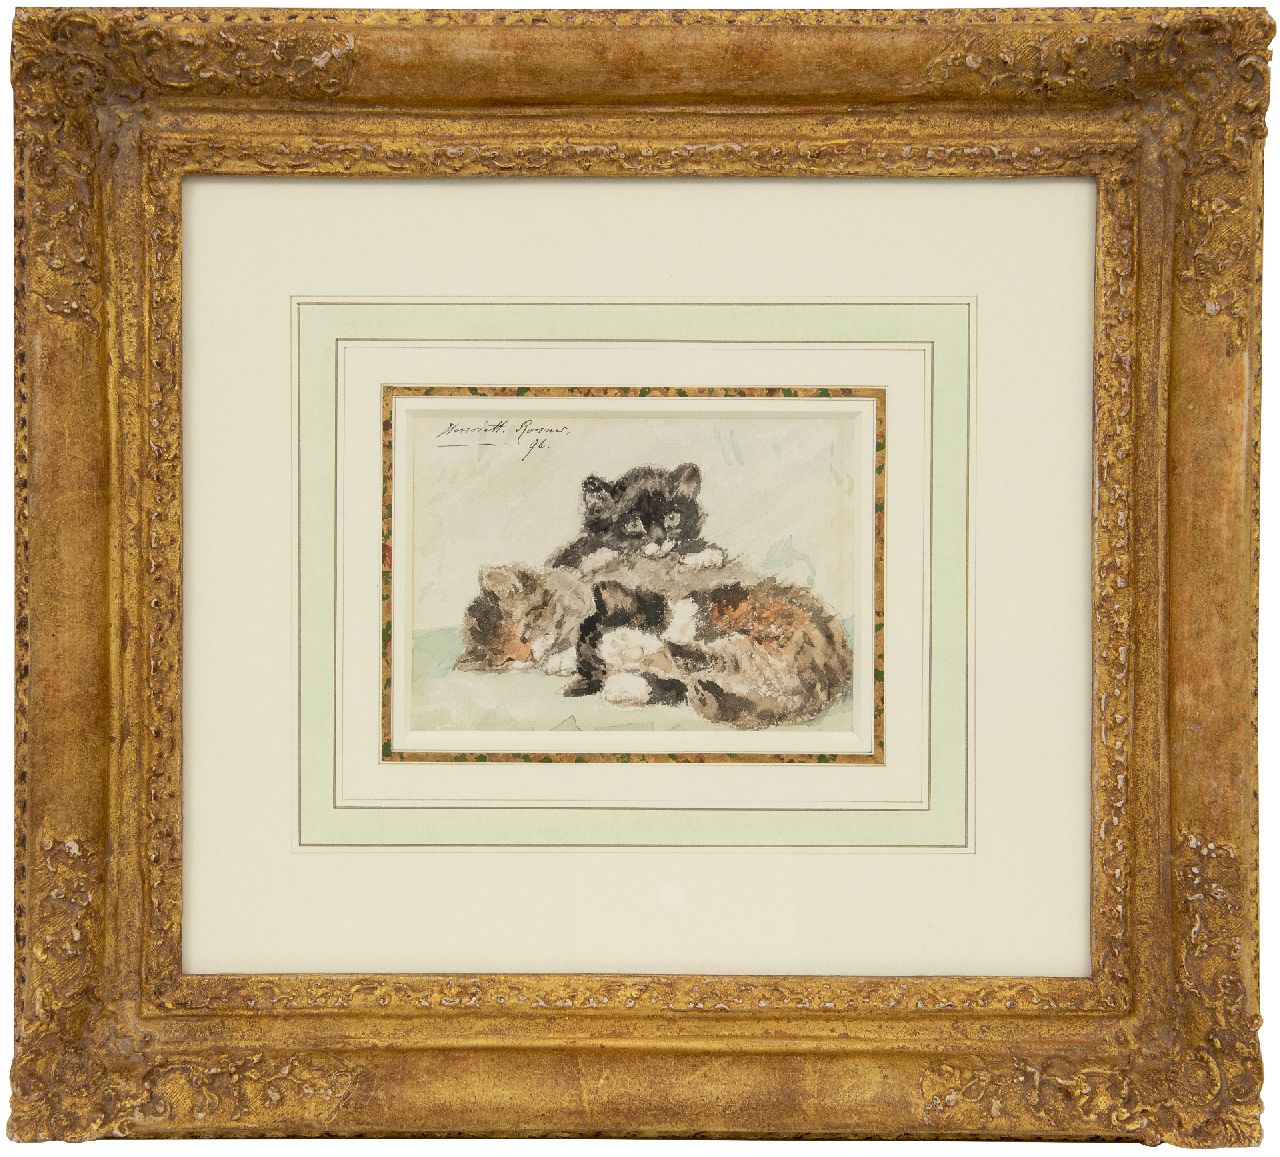 Ronner-Knip H.  | Henriette Ronner-Knip, Three kittens, watercolour on paper 10.5 x 14.5 cm, signed u.l. and dated '96